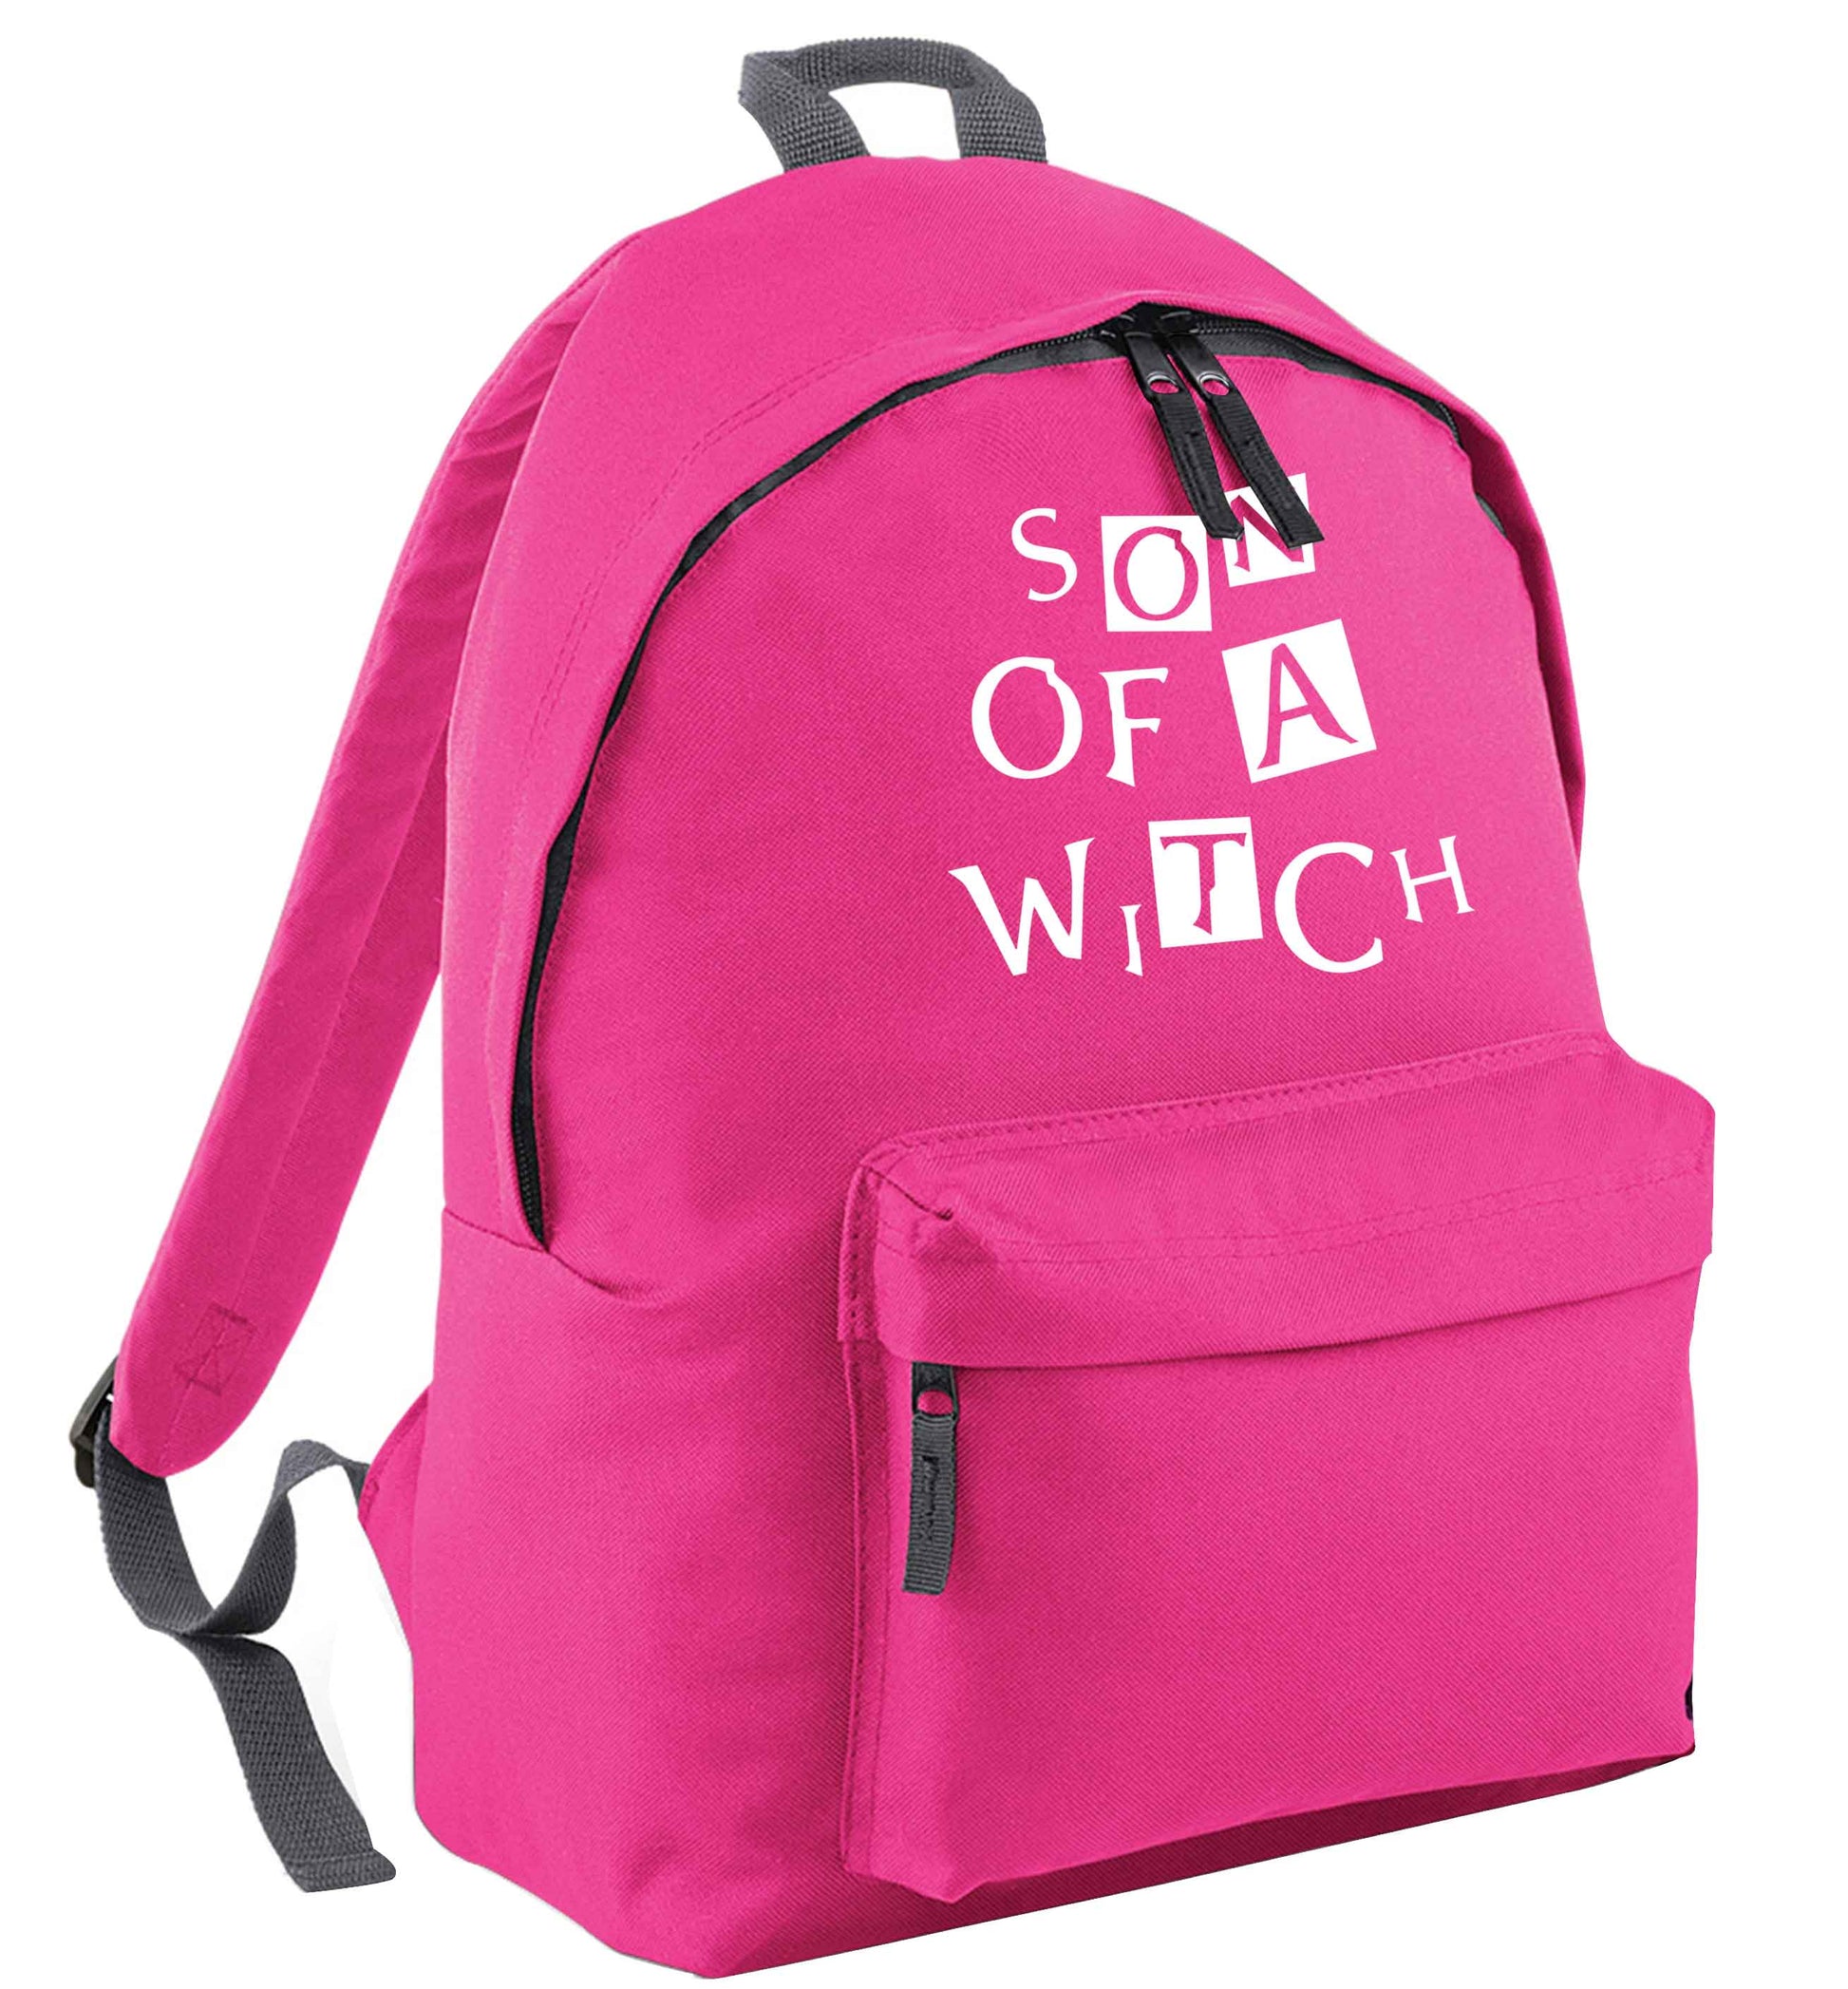 Son of a witch pink adults backpack